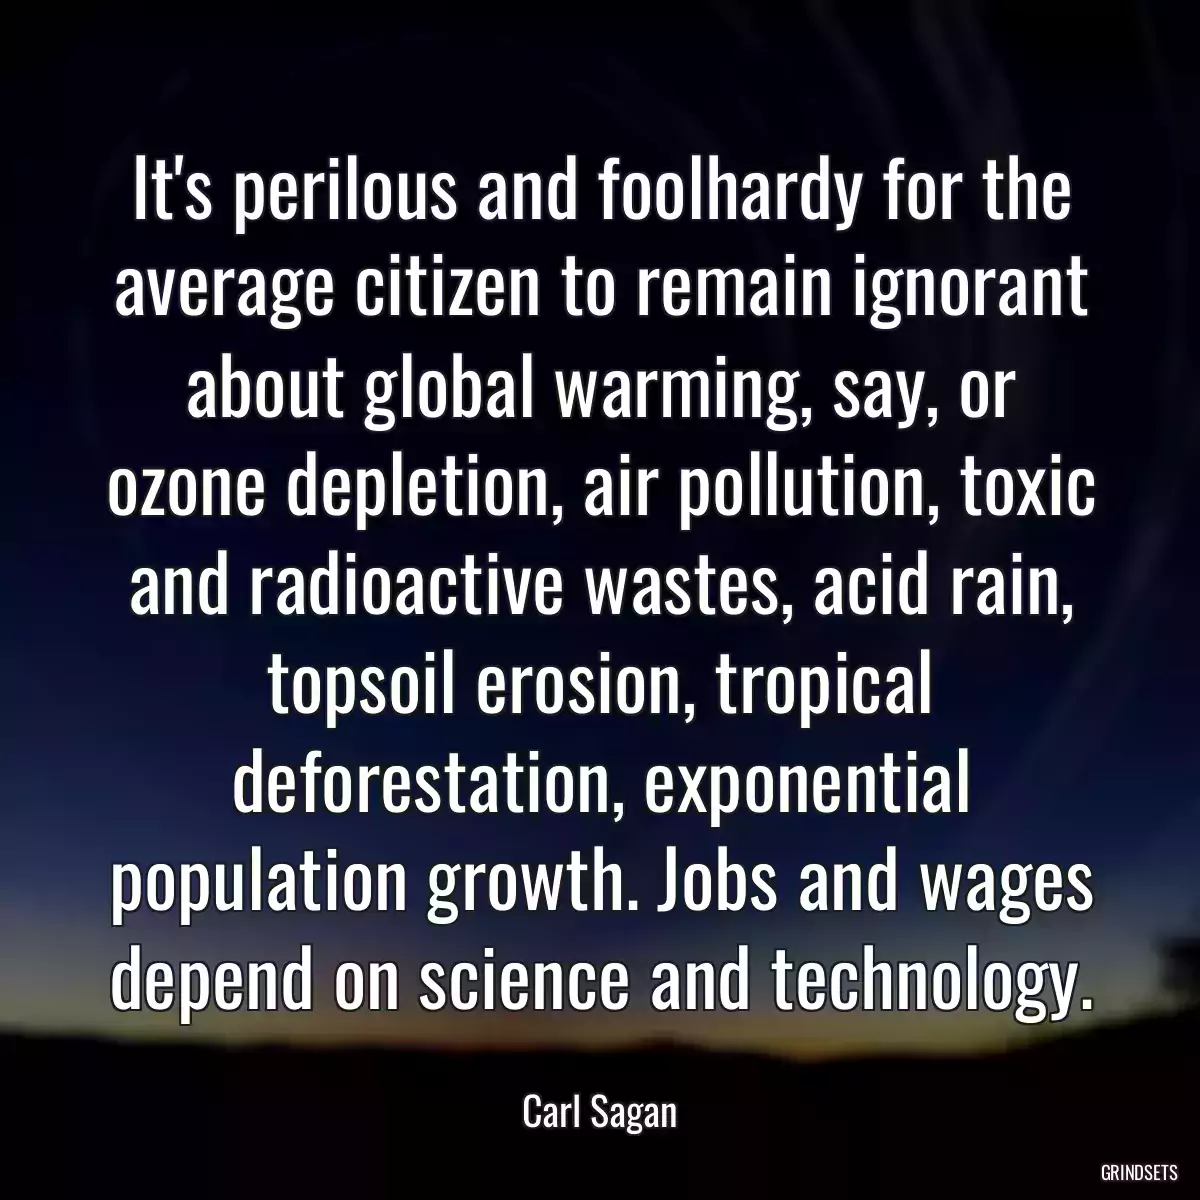 It\'s perilous and foolhardy for the average citizen to remain ignorant about global warming, say, or ozone depletion, air pollution, toxic and radioactive wastes, acid rain, topsoil erosion, tropical deforestation, exponential population growth. Jobs and wages depend on science and technology.